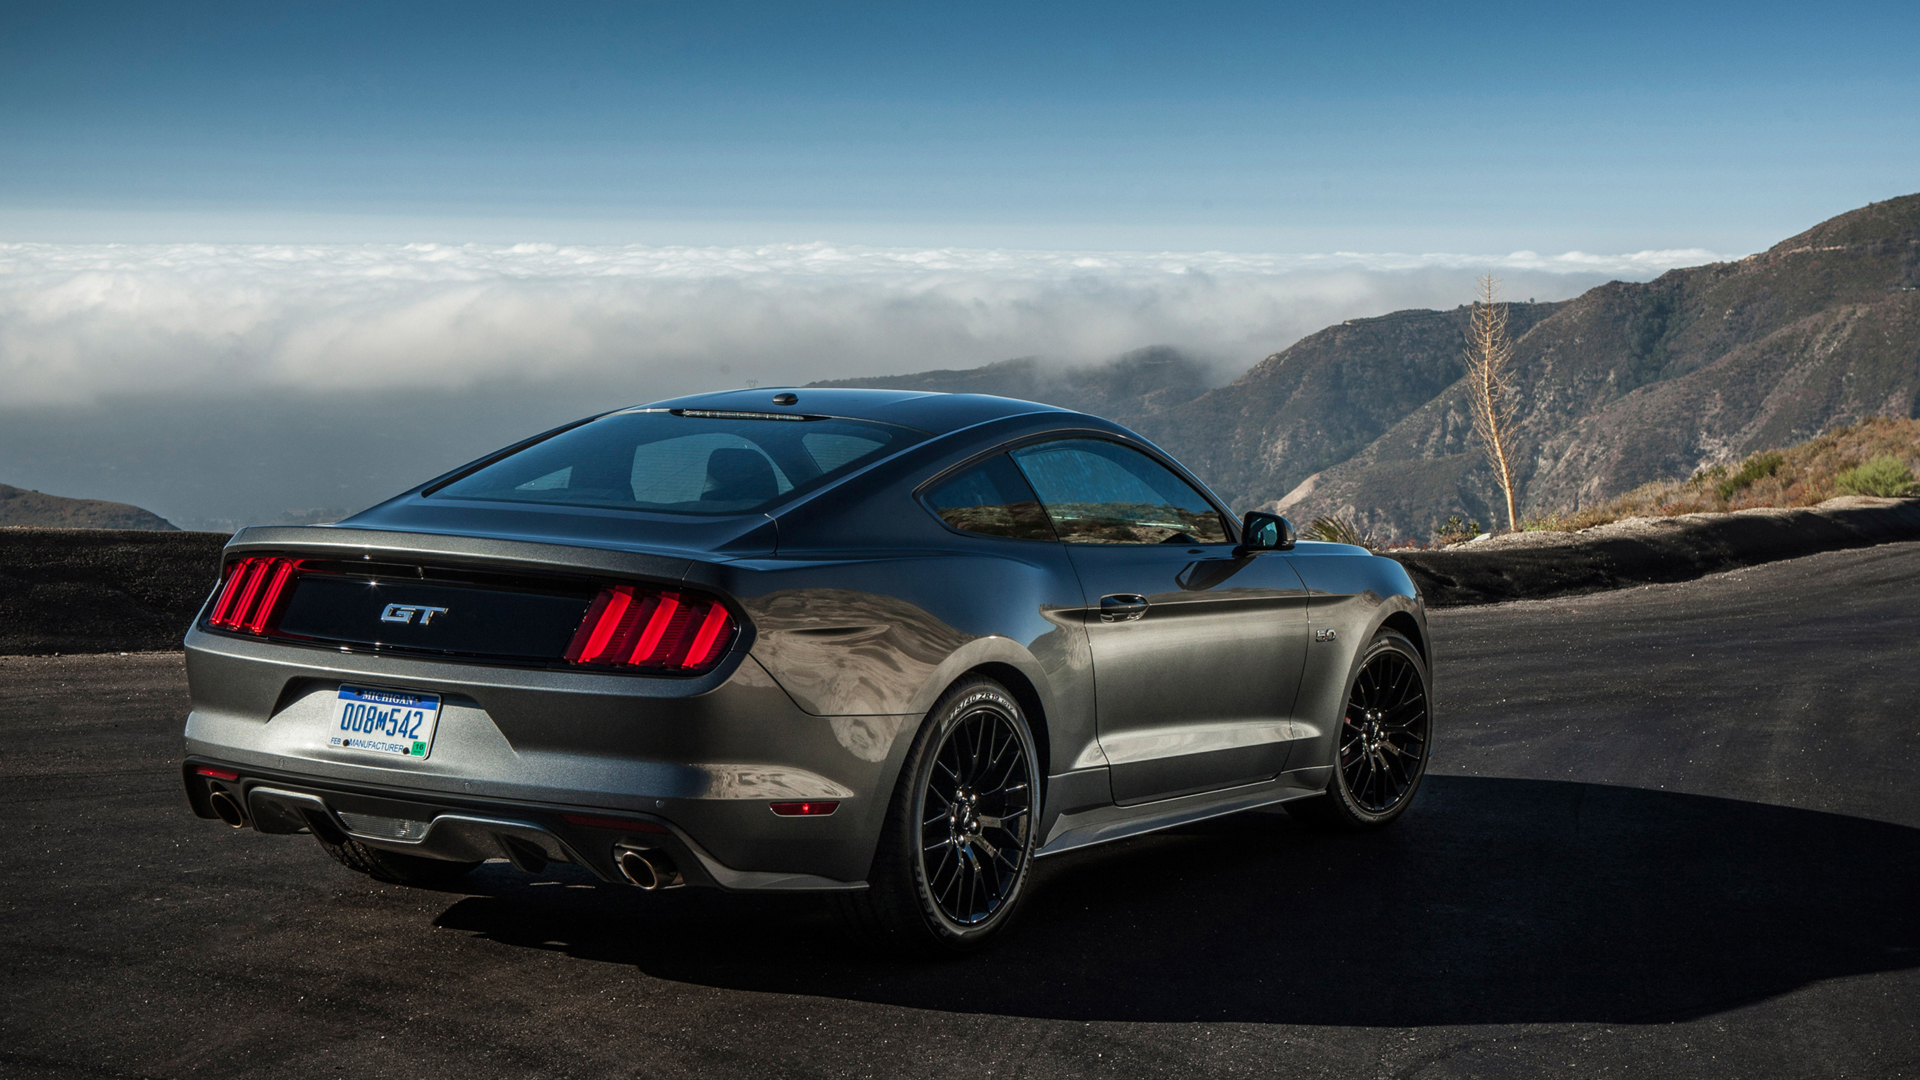 Free download Ford Mustang GT 2015 Wallpaper HD HdCoolWallpaperCom [1920x1080] for your Desktop, Mobile & Tablet. Explore Ford Mustang GT Wallpaper HD. HD Mustang Wallpaper, Mustang Wallpaper for Computer